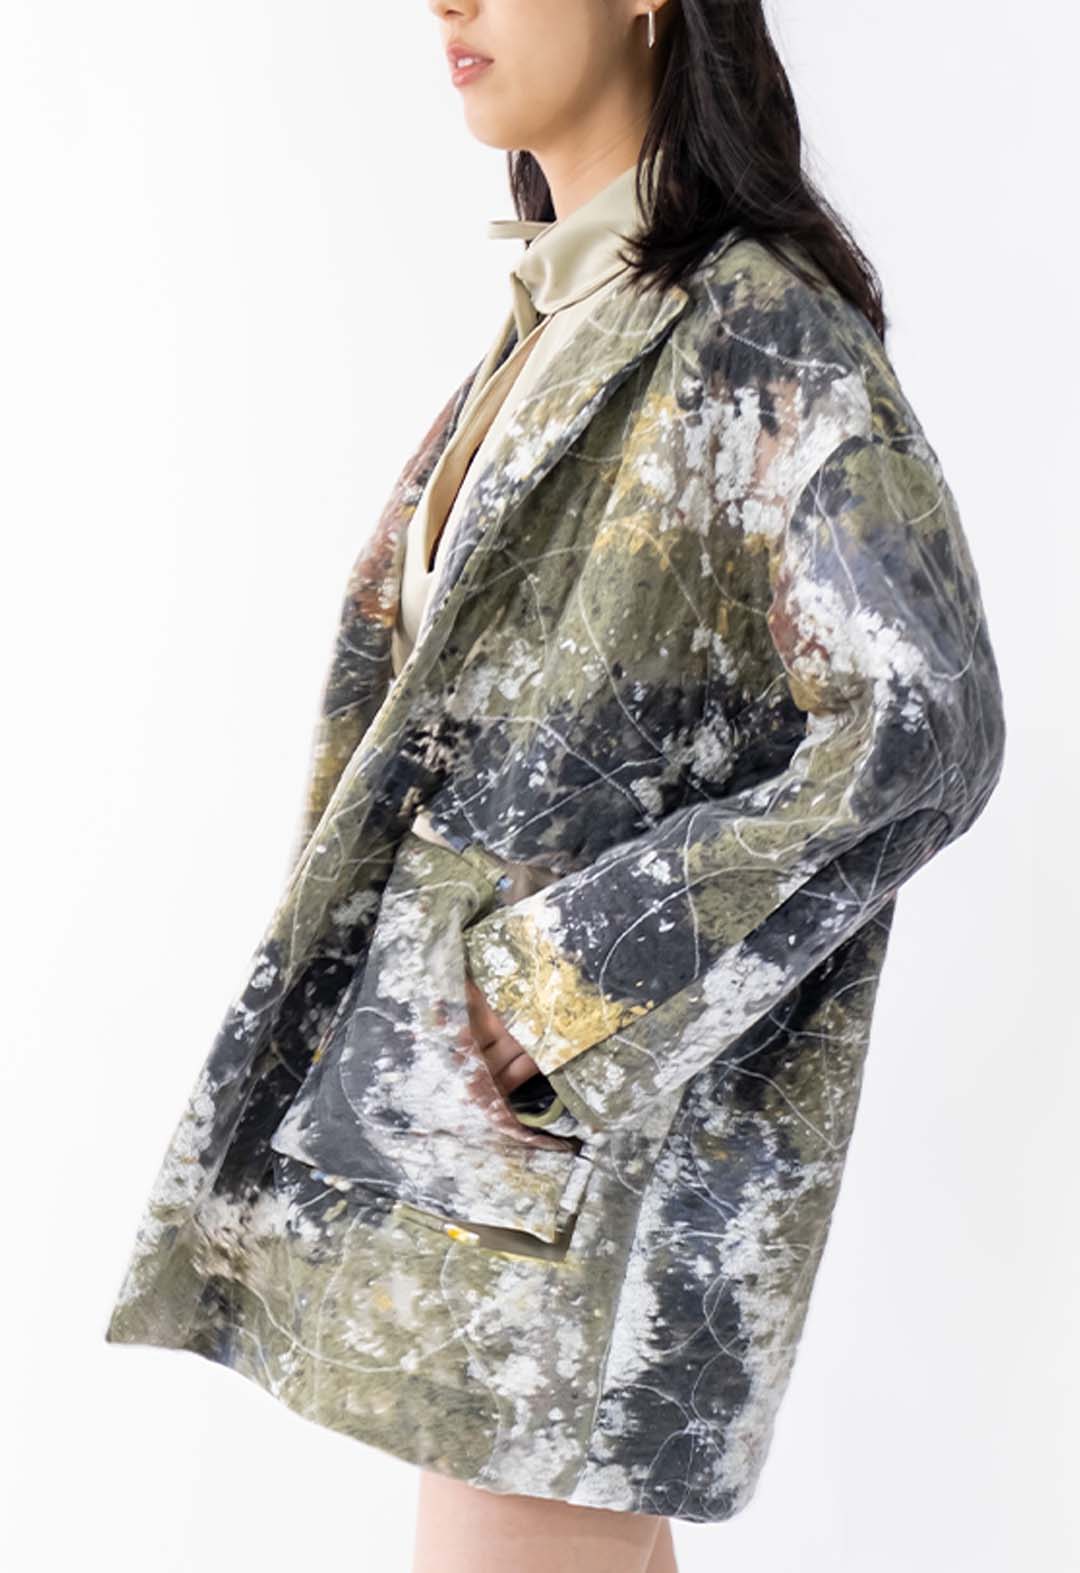 Side view of an abstract scrap fabric jacket, showing the details of a cut-out pocket that is held together with tabs on both the jacket and the pocket itself. Two tabs are held together on each side of the pocket with hardware made from resin that has flowers pressed inside. The model is in front of a white background and is looking off into the distance with her hand inside the pocket.